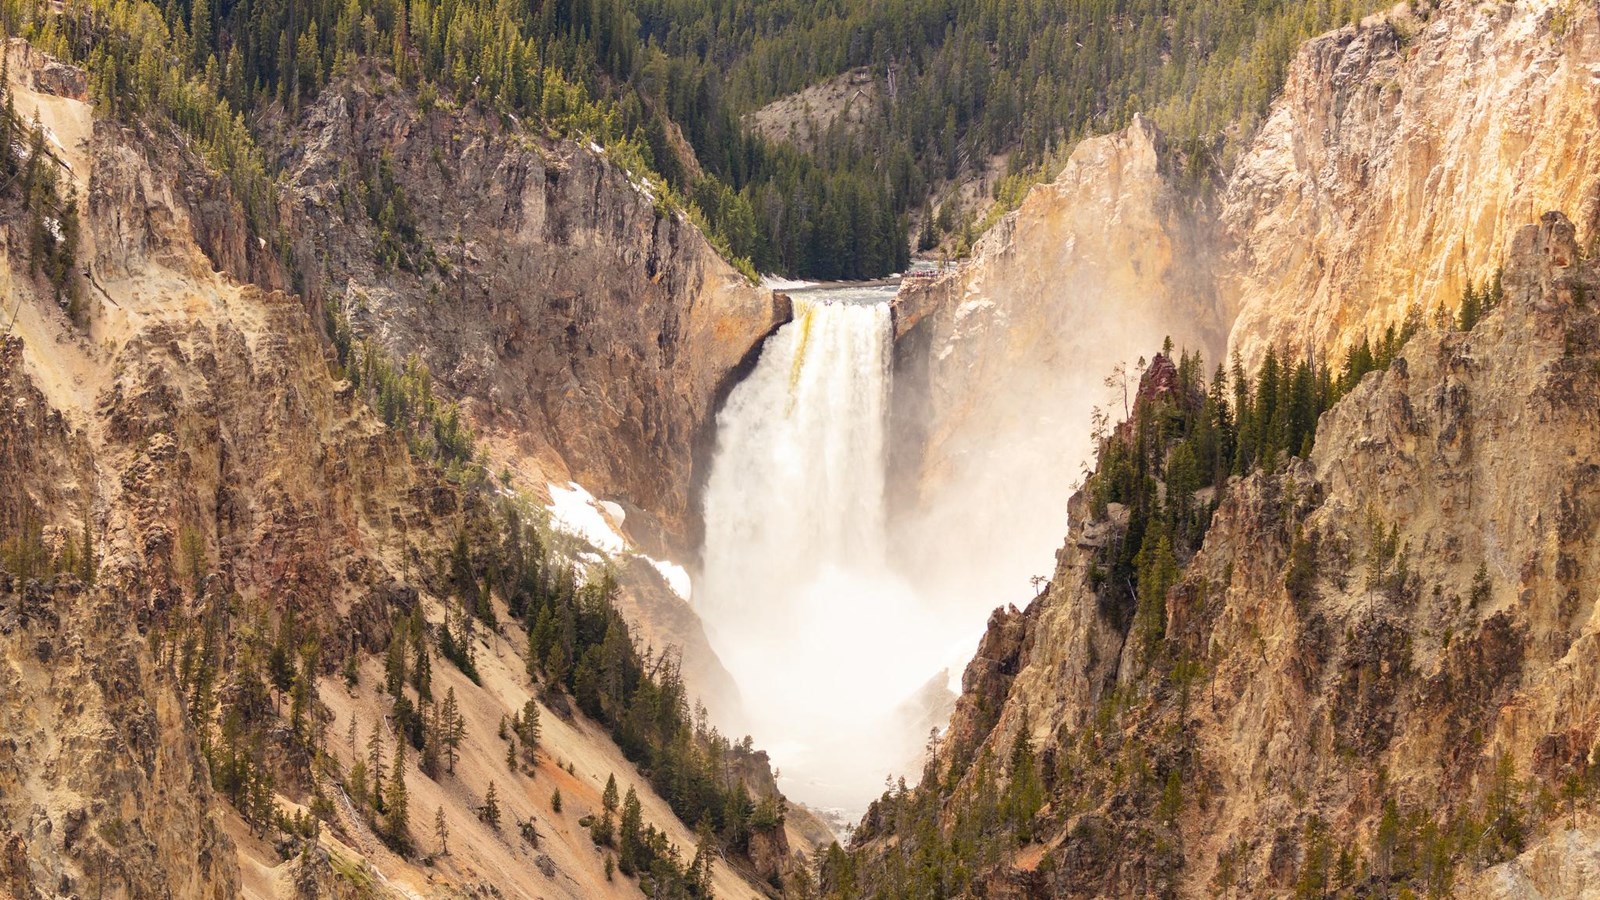 A 300 foot waterfall spills into a canyon colored in shades of yellow and gray.